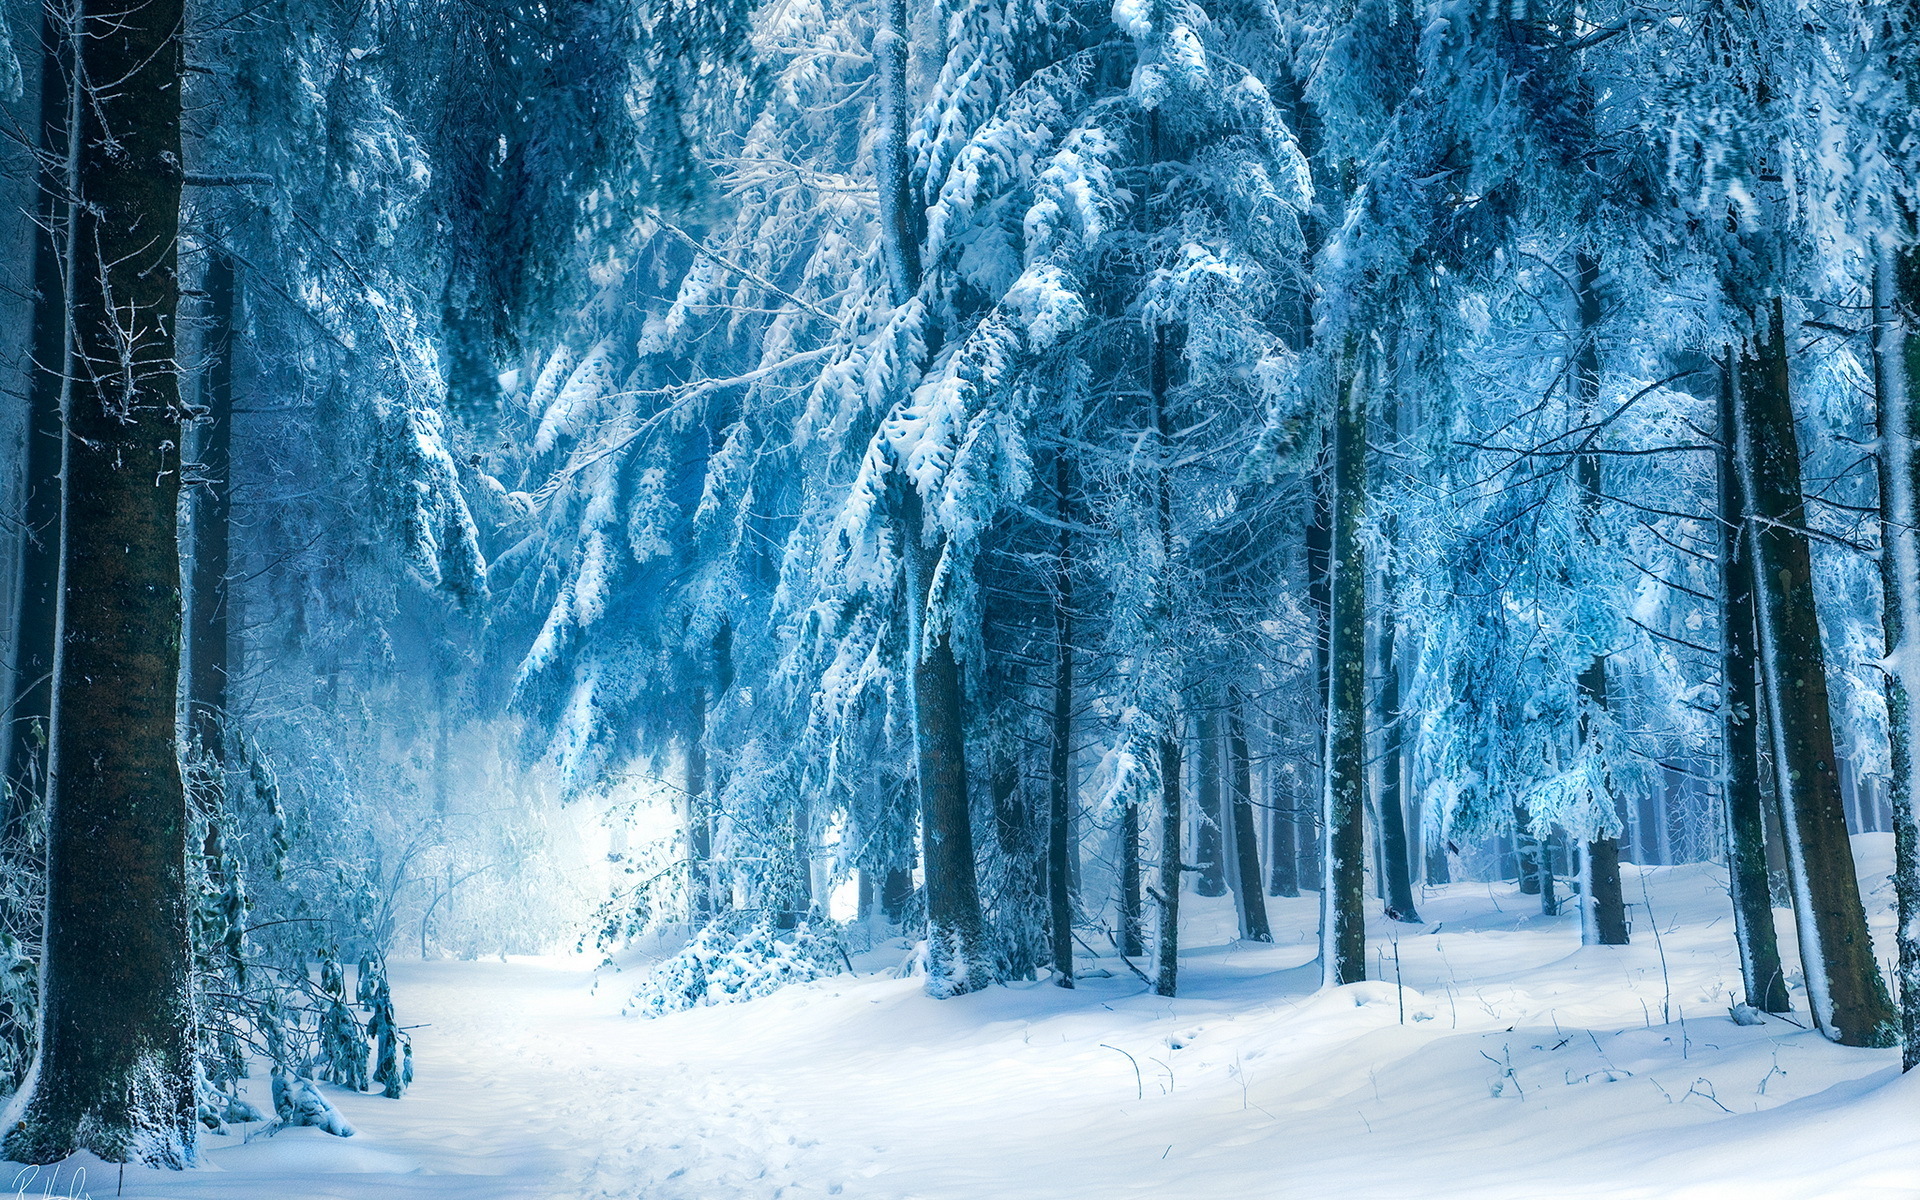 Winter Background Wallpaper Win10 Themes